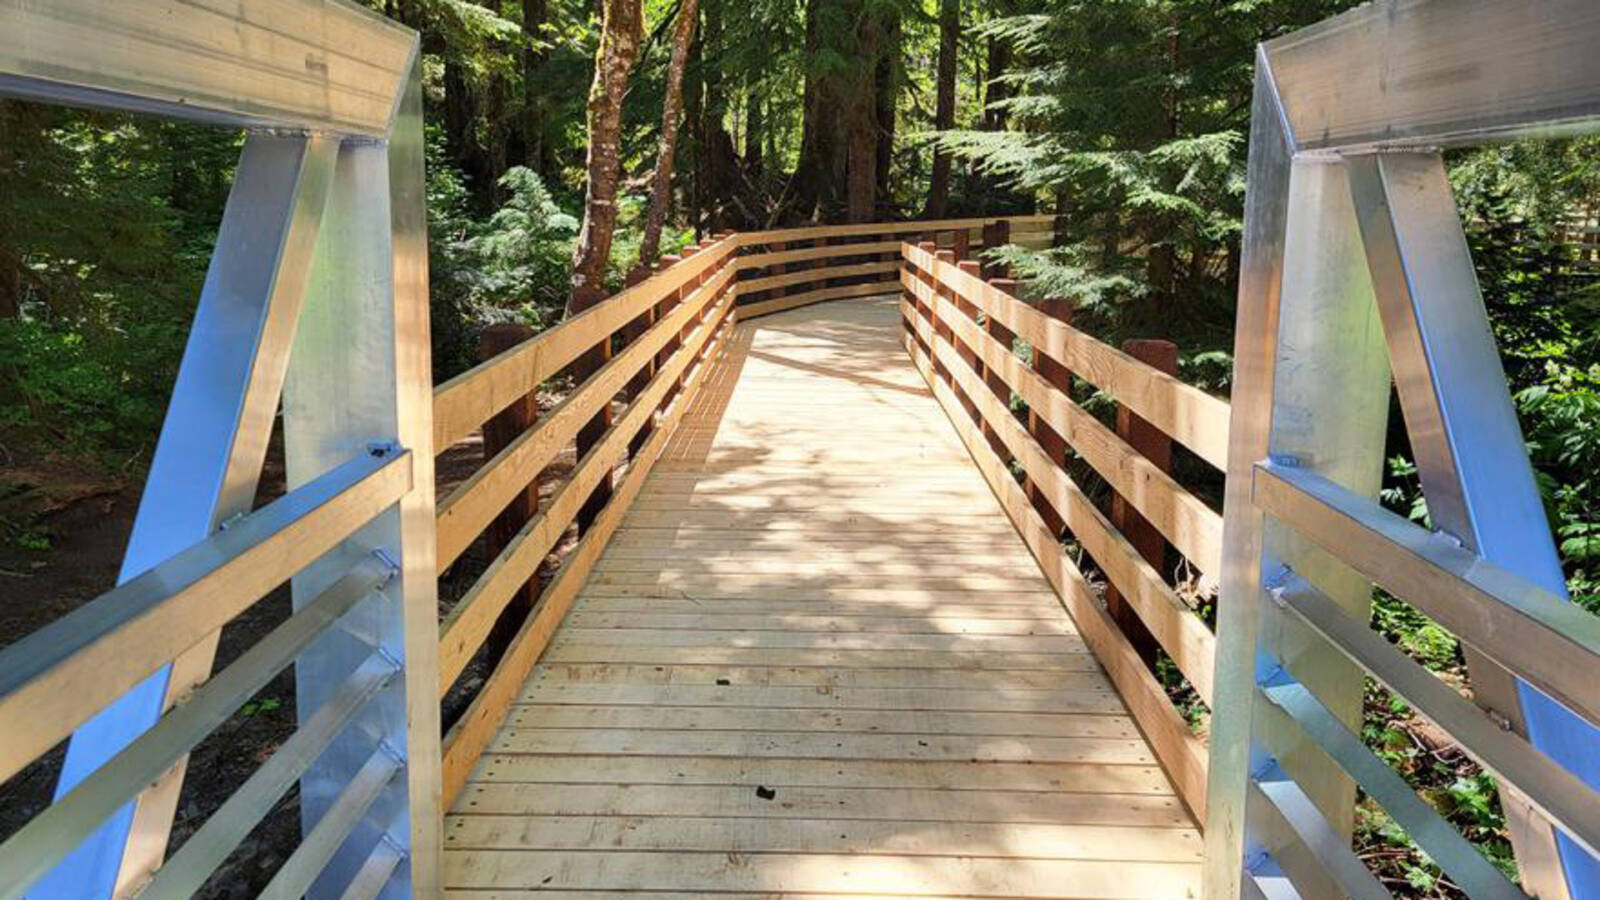 <p>Repair of the Big Four Ice Caves Bridge at Mt. Baker-Snoqualmie National Forest in Washington State. More than 60,000 people use the footbridge to access the 1.1 mile-Ice Caves Trail; however, it was closed in 2019 due to safety reasons. The bridge was reopened in the summer of 2023 and expanded to allow wheelchair accessibility. </p>